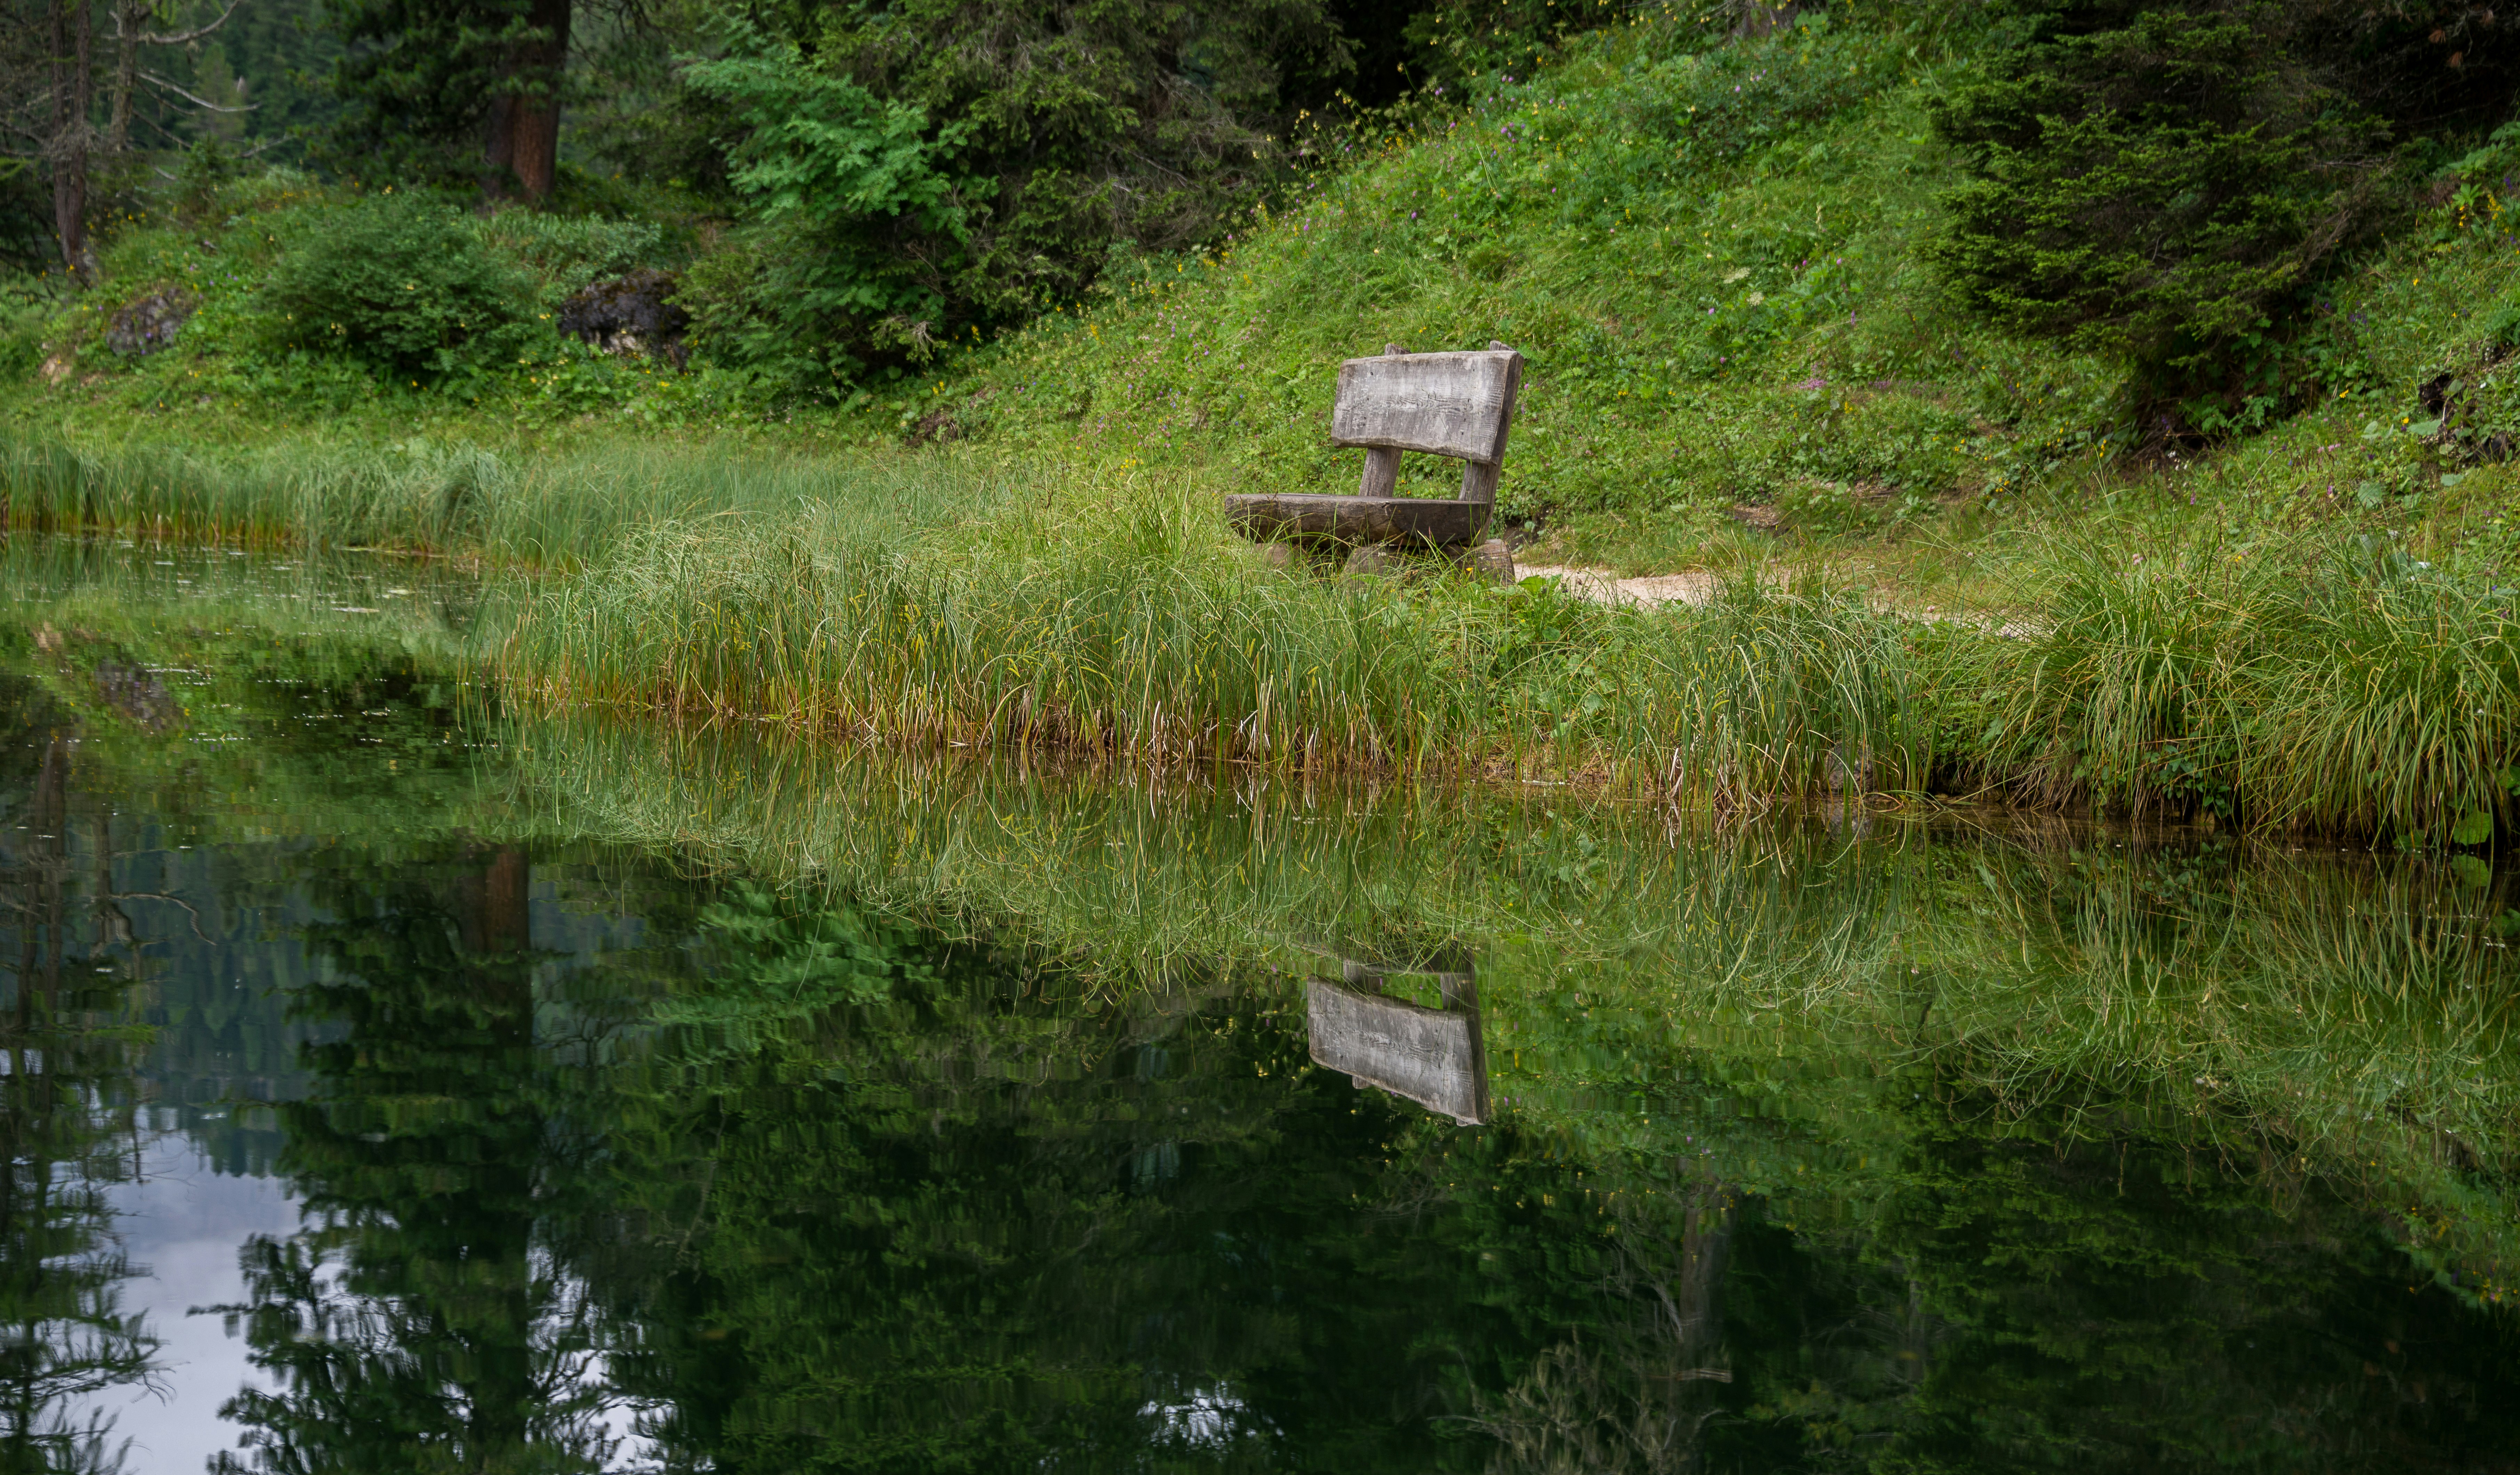 bench near body of water during daytime